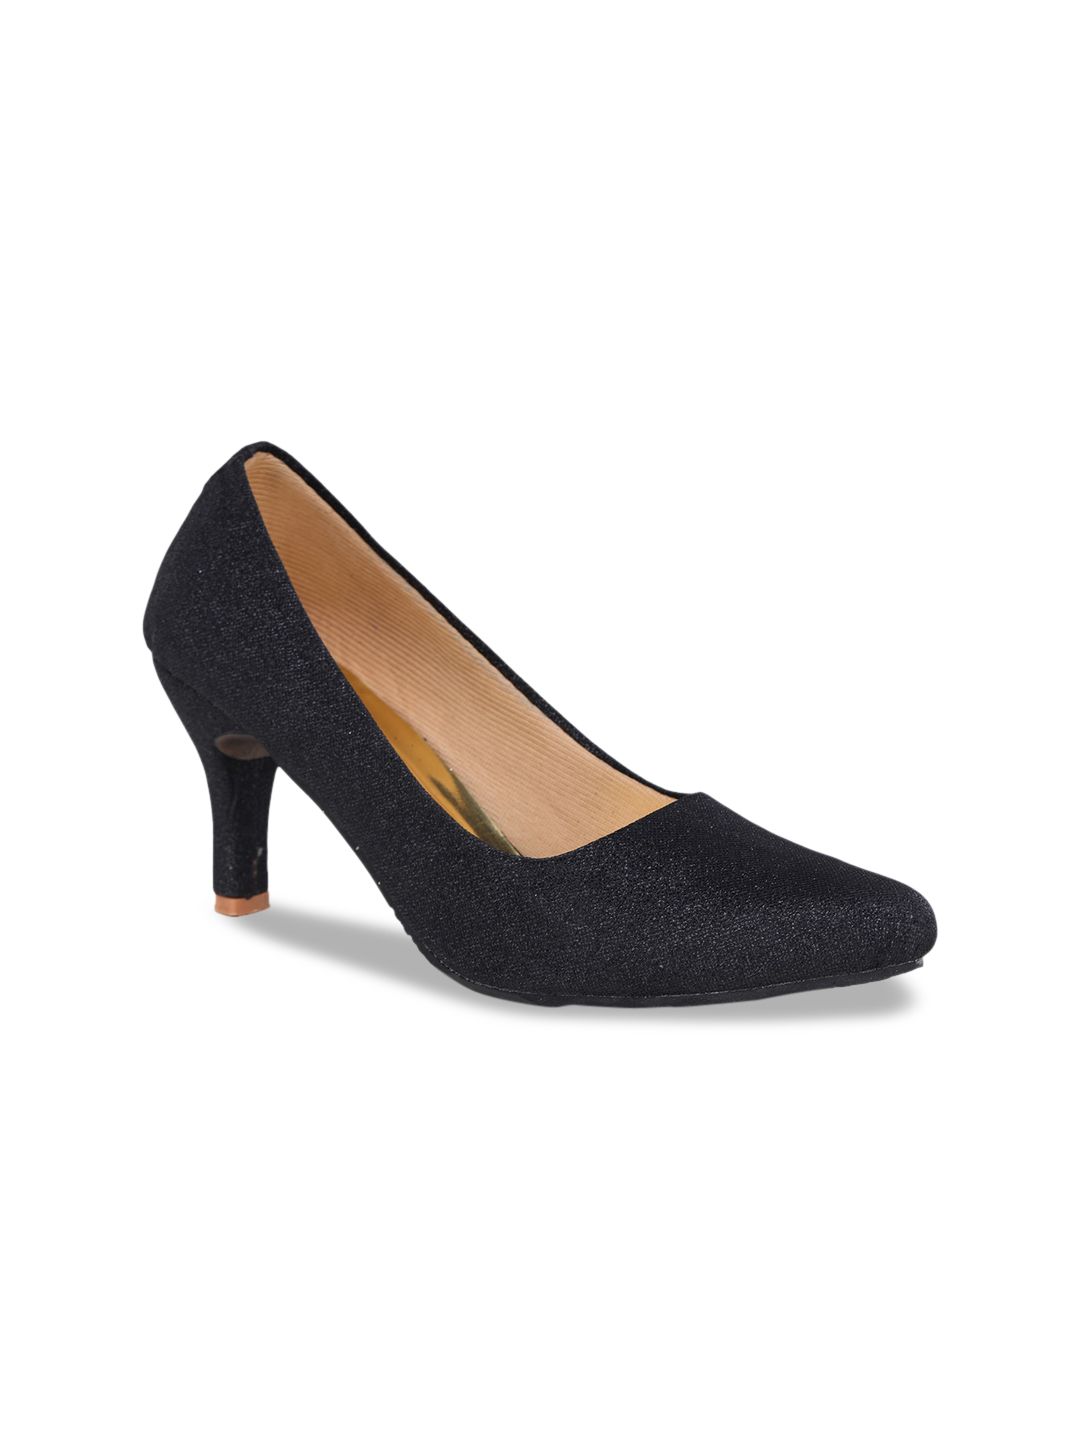 LONDON STEPS Black Textured Stiletto Pumps Price in India